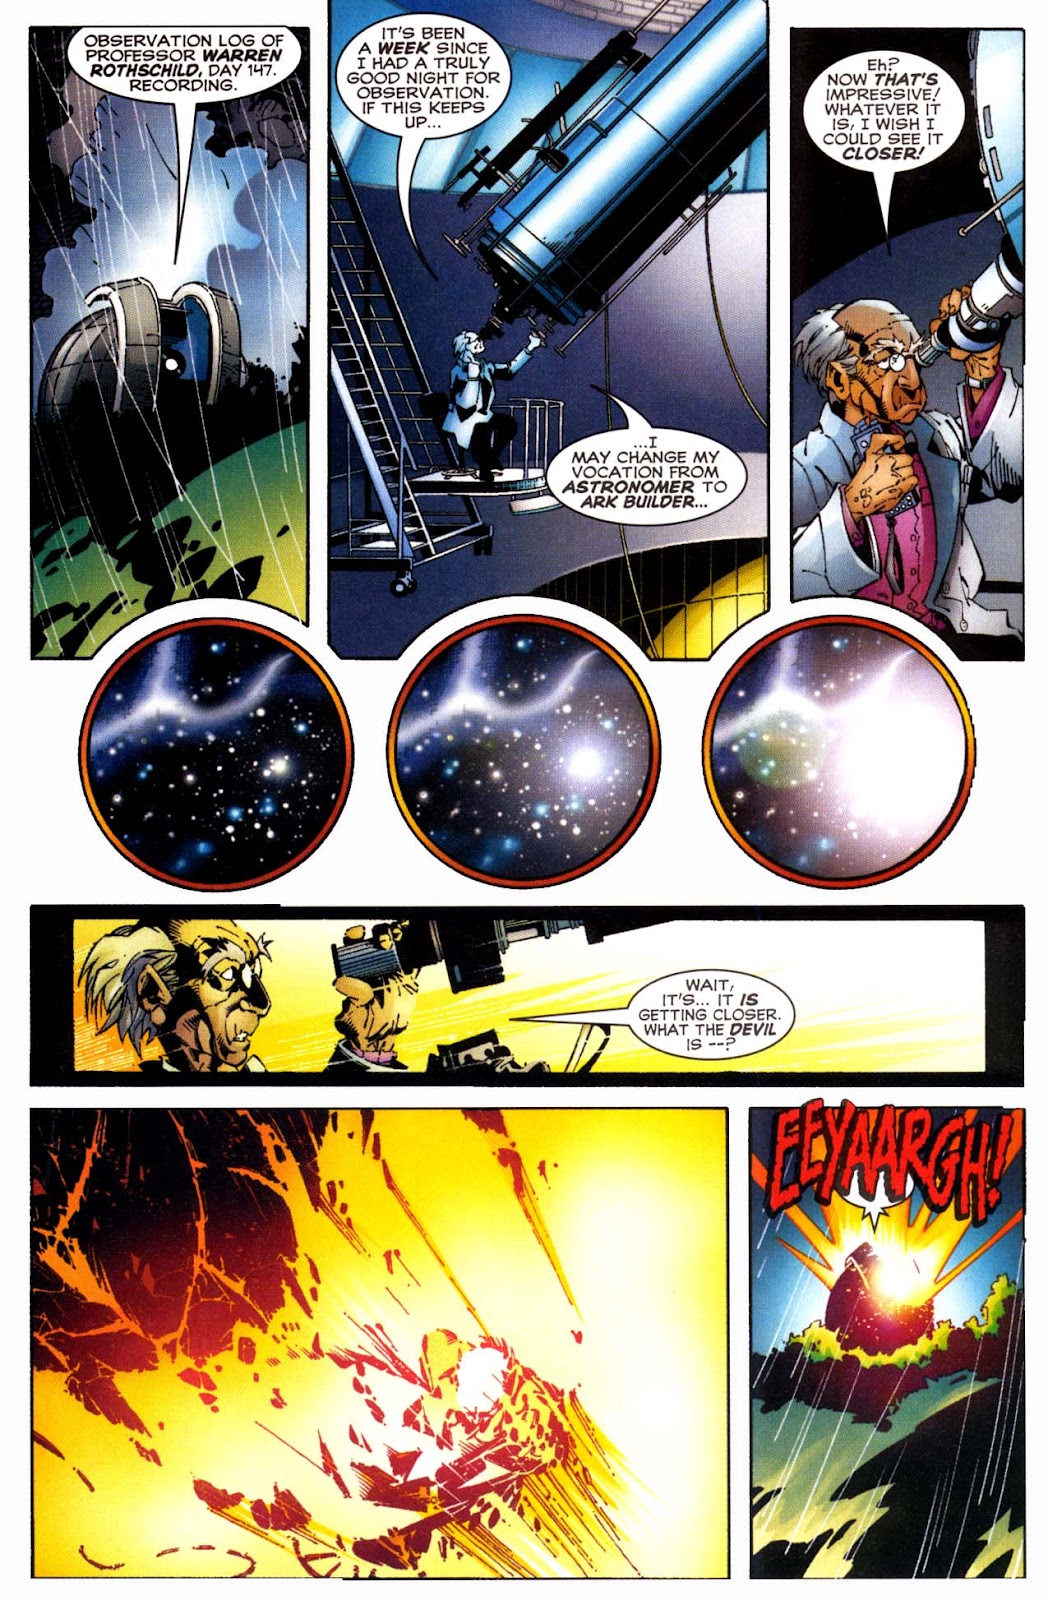 Heroes Reborn: The Return issue 1 - Page 16